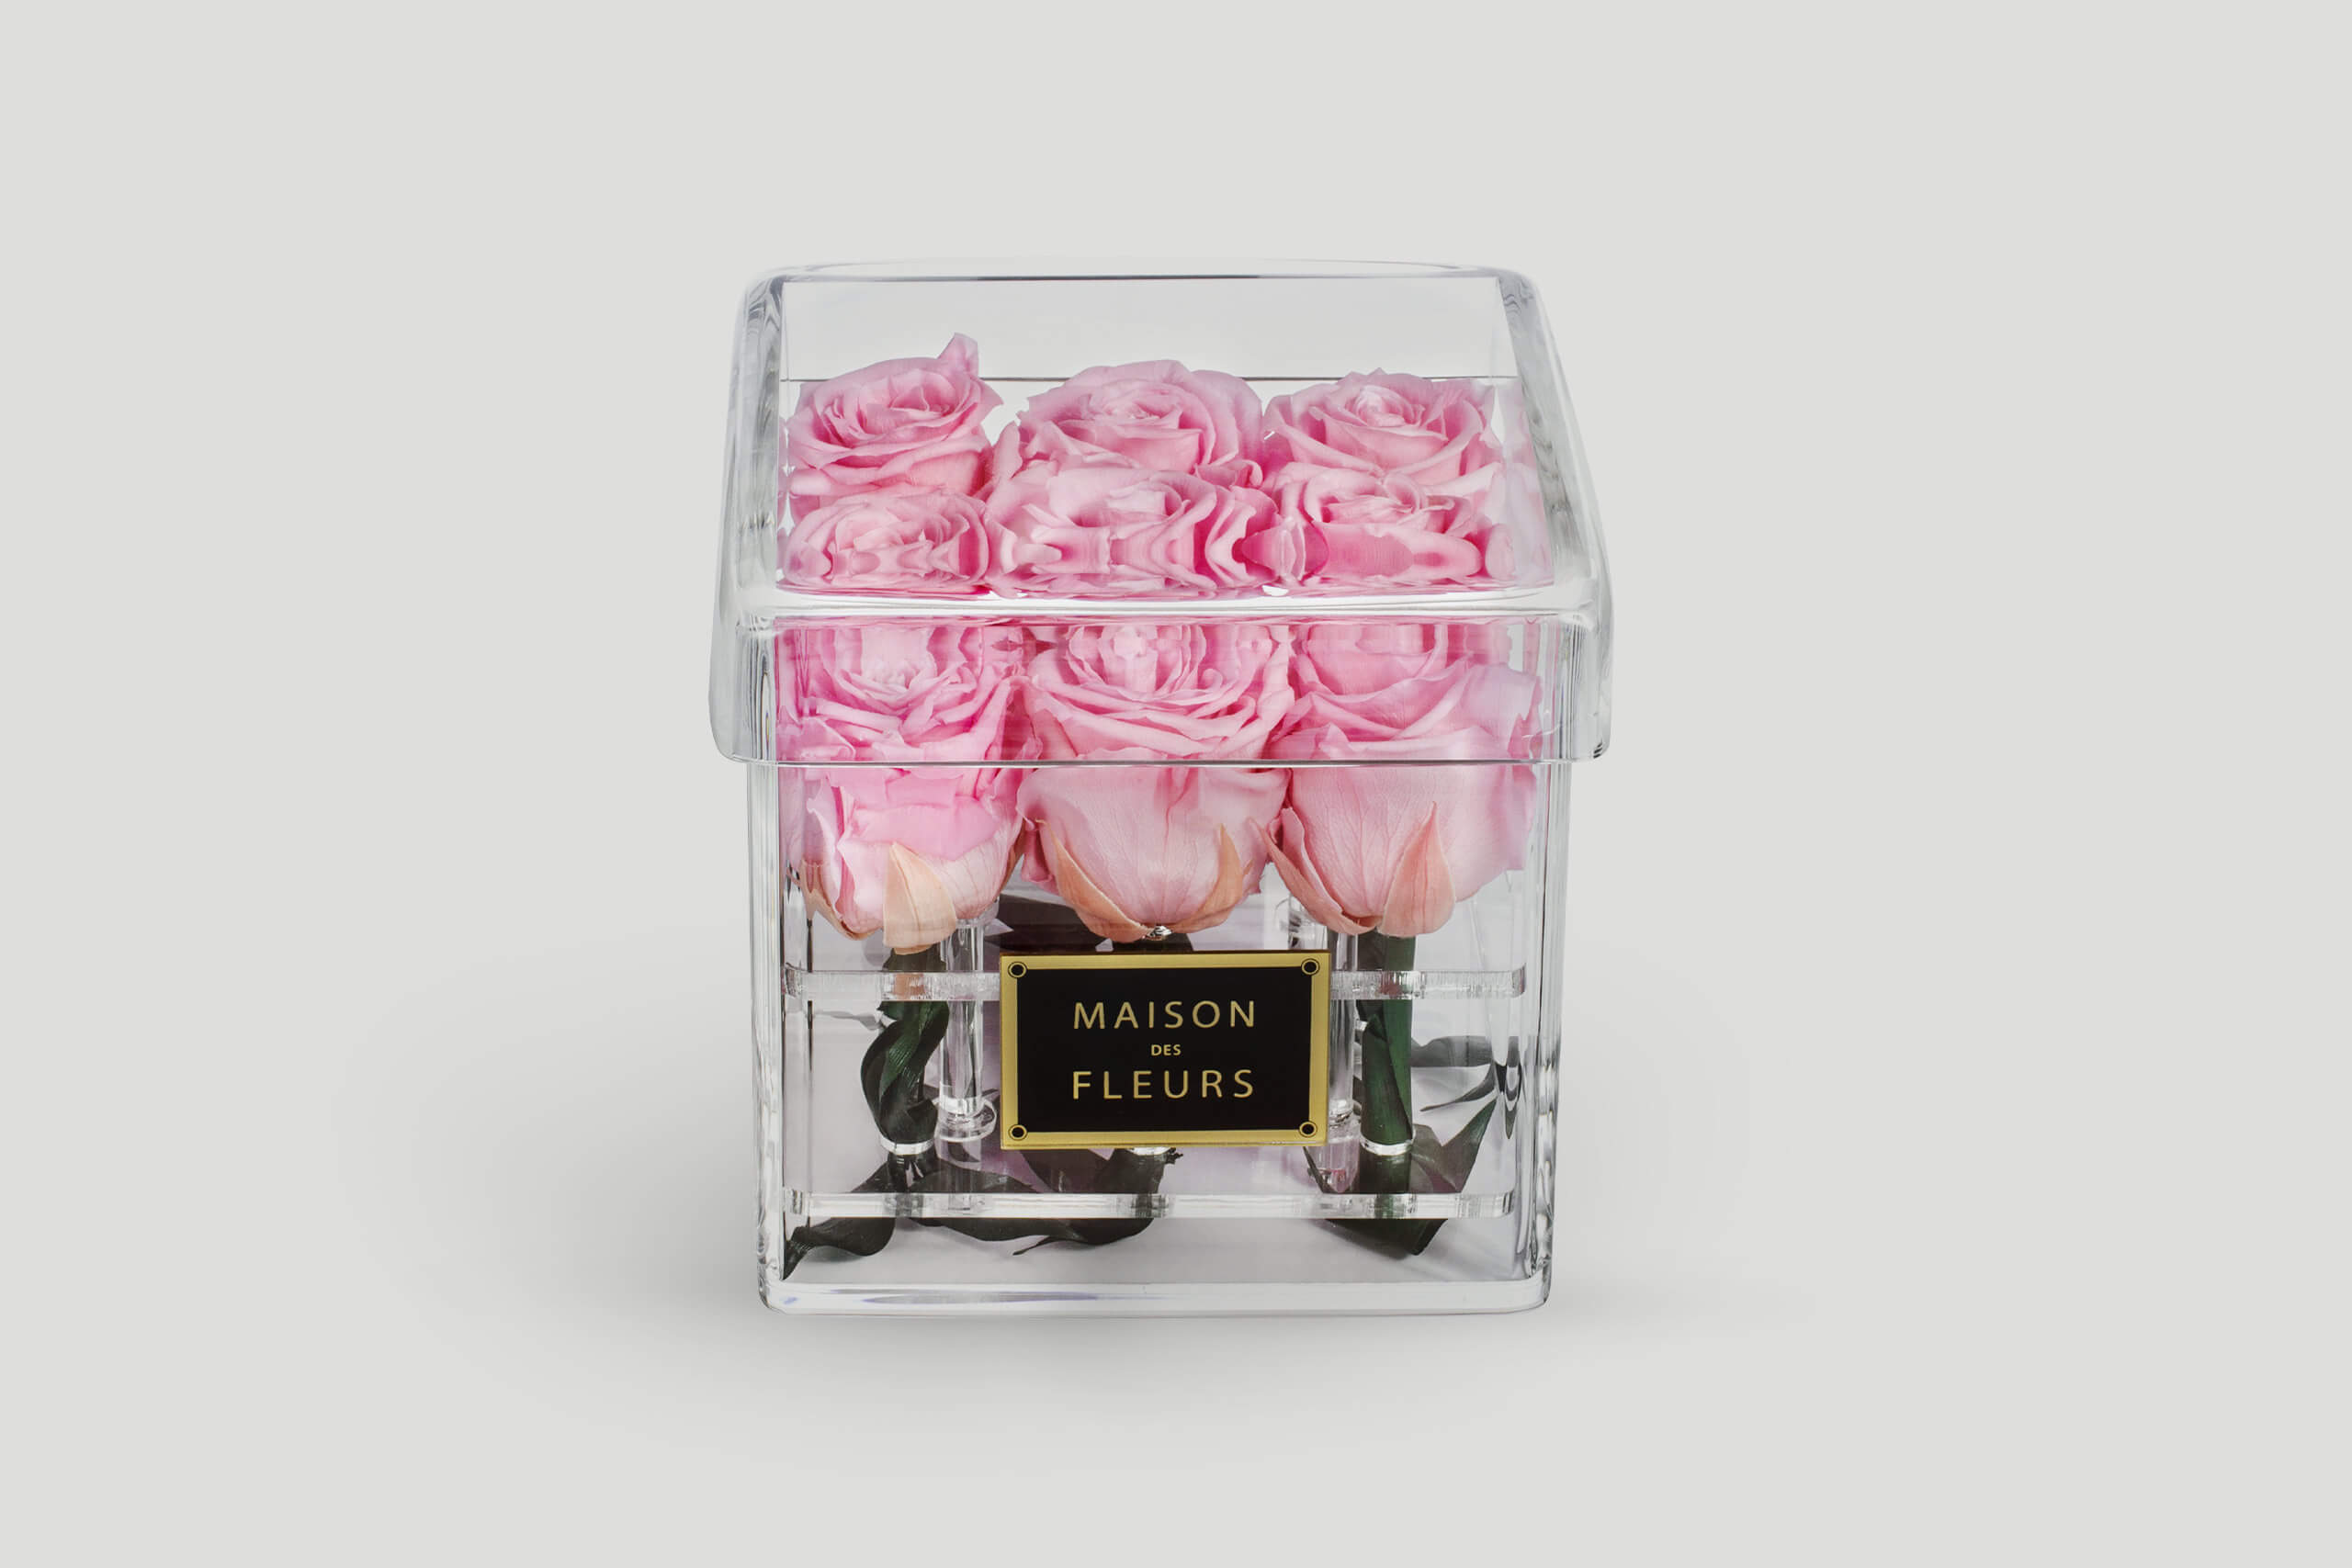 9 Long Life Pink Roses in an Acrylic Box